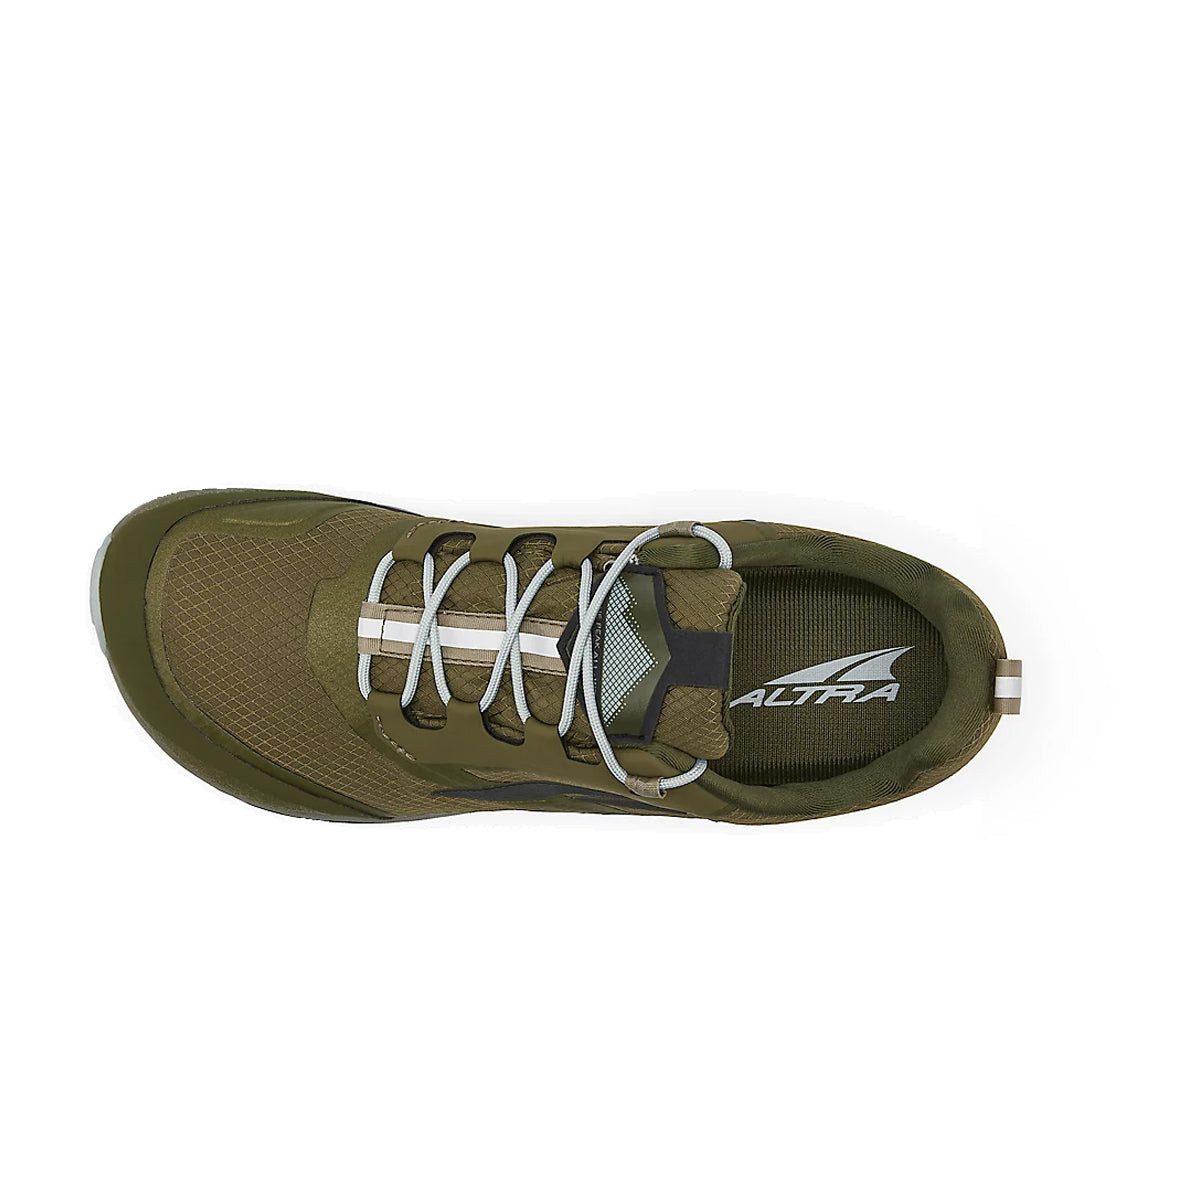 Altra Lone Peak All-WTHR Low in Dusty Olive by GOHUNT | Altra - GOHUNT Shop